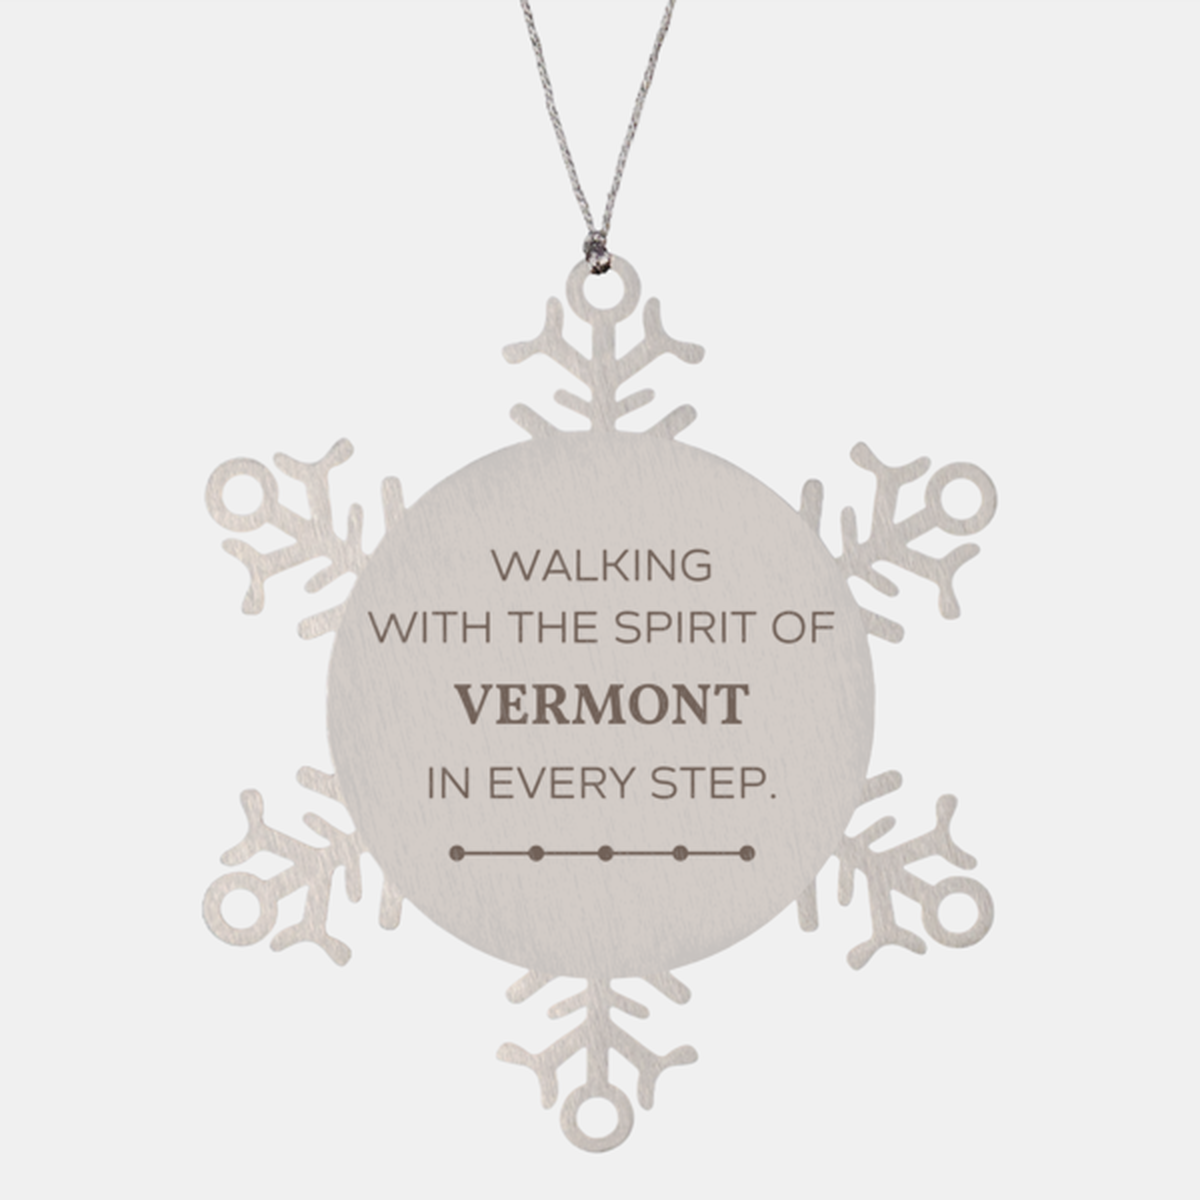 Vermont Gifts, Walking with the spirit, Love Vermont Birthday Christmas Snowflake Ornament For Vermont People, Men, Women, Friends